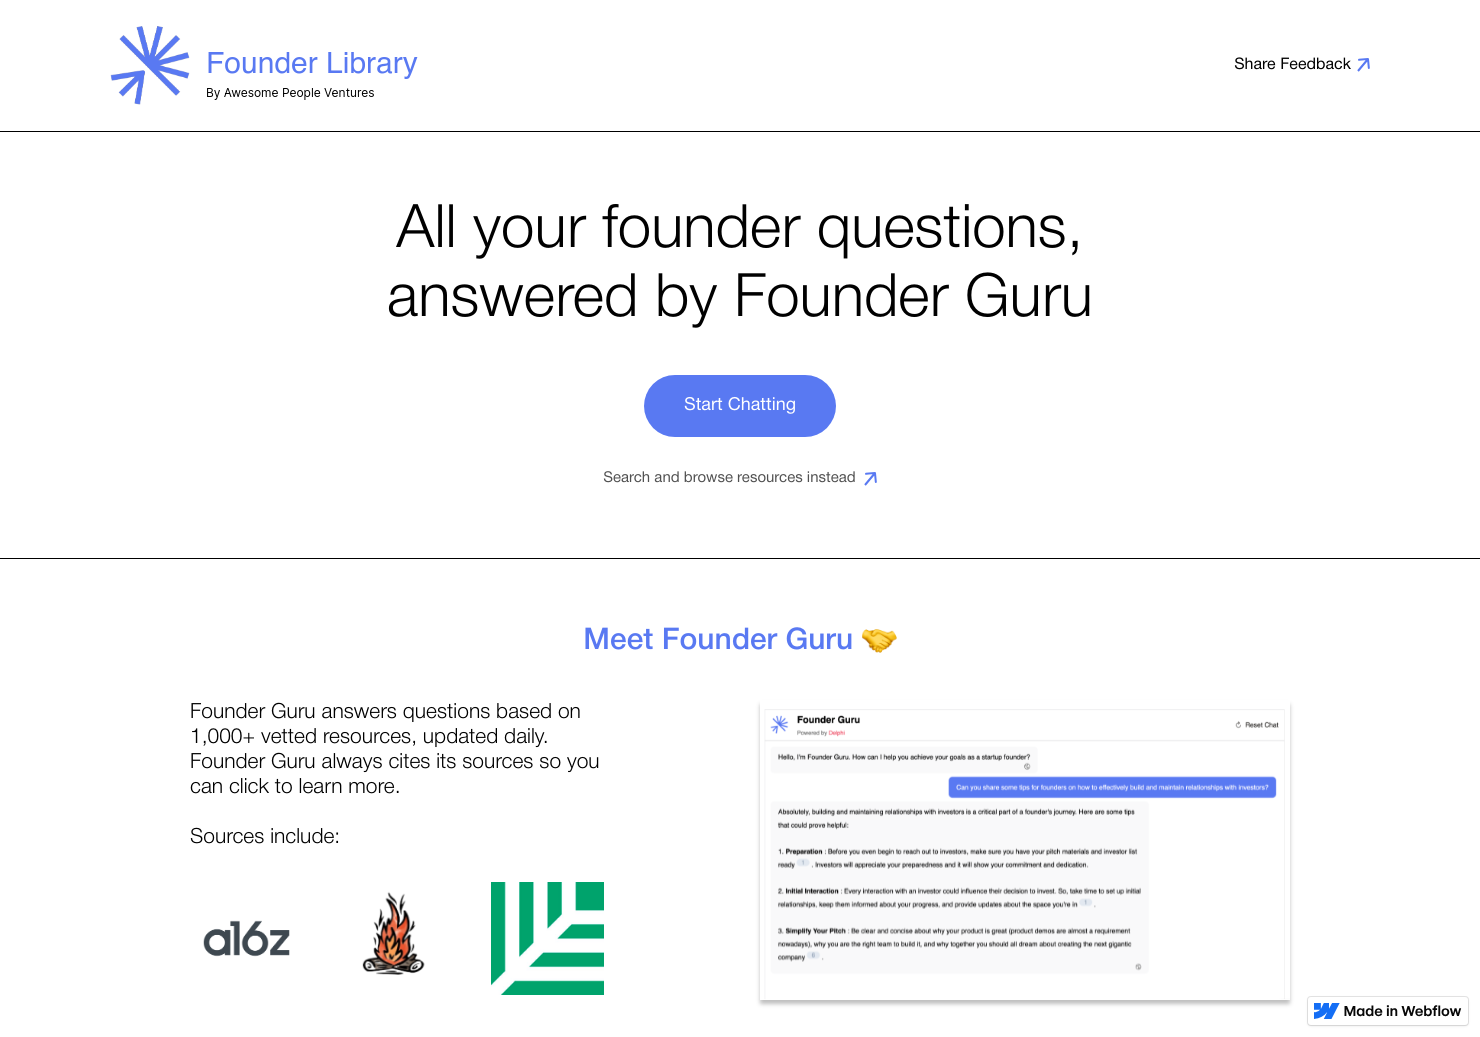 The Founder Library